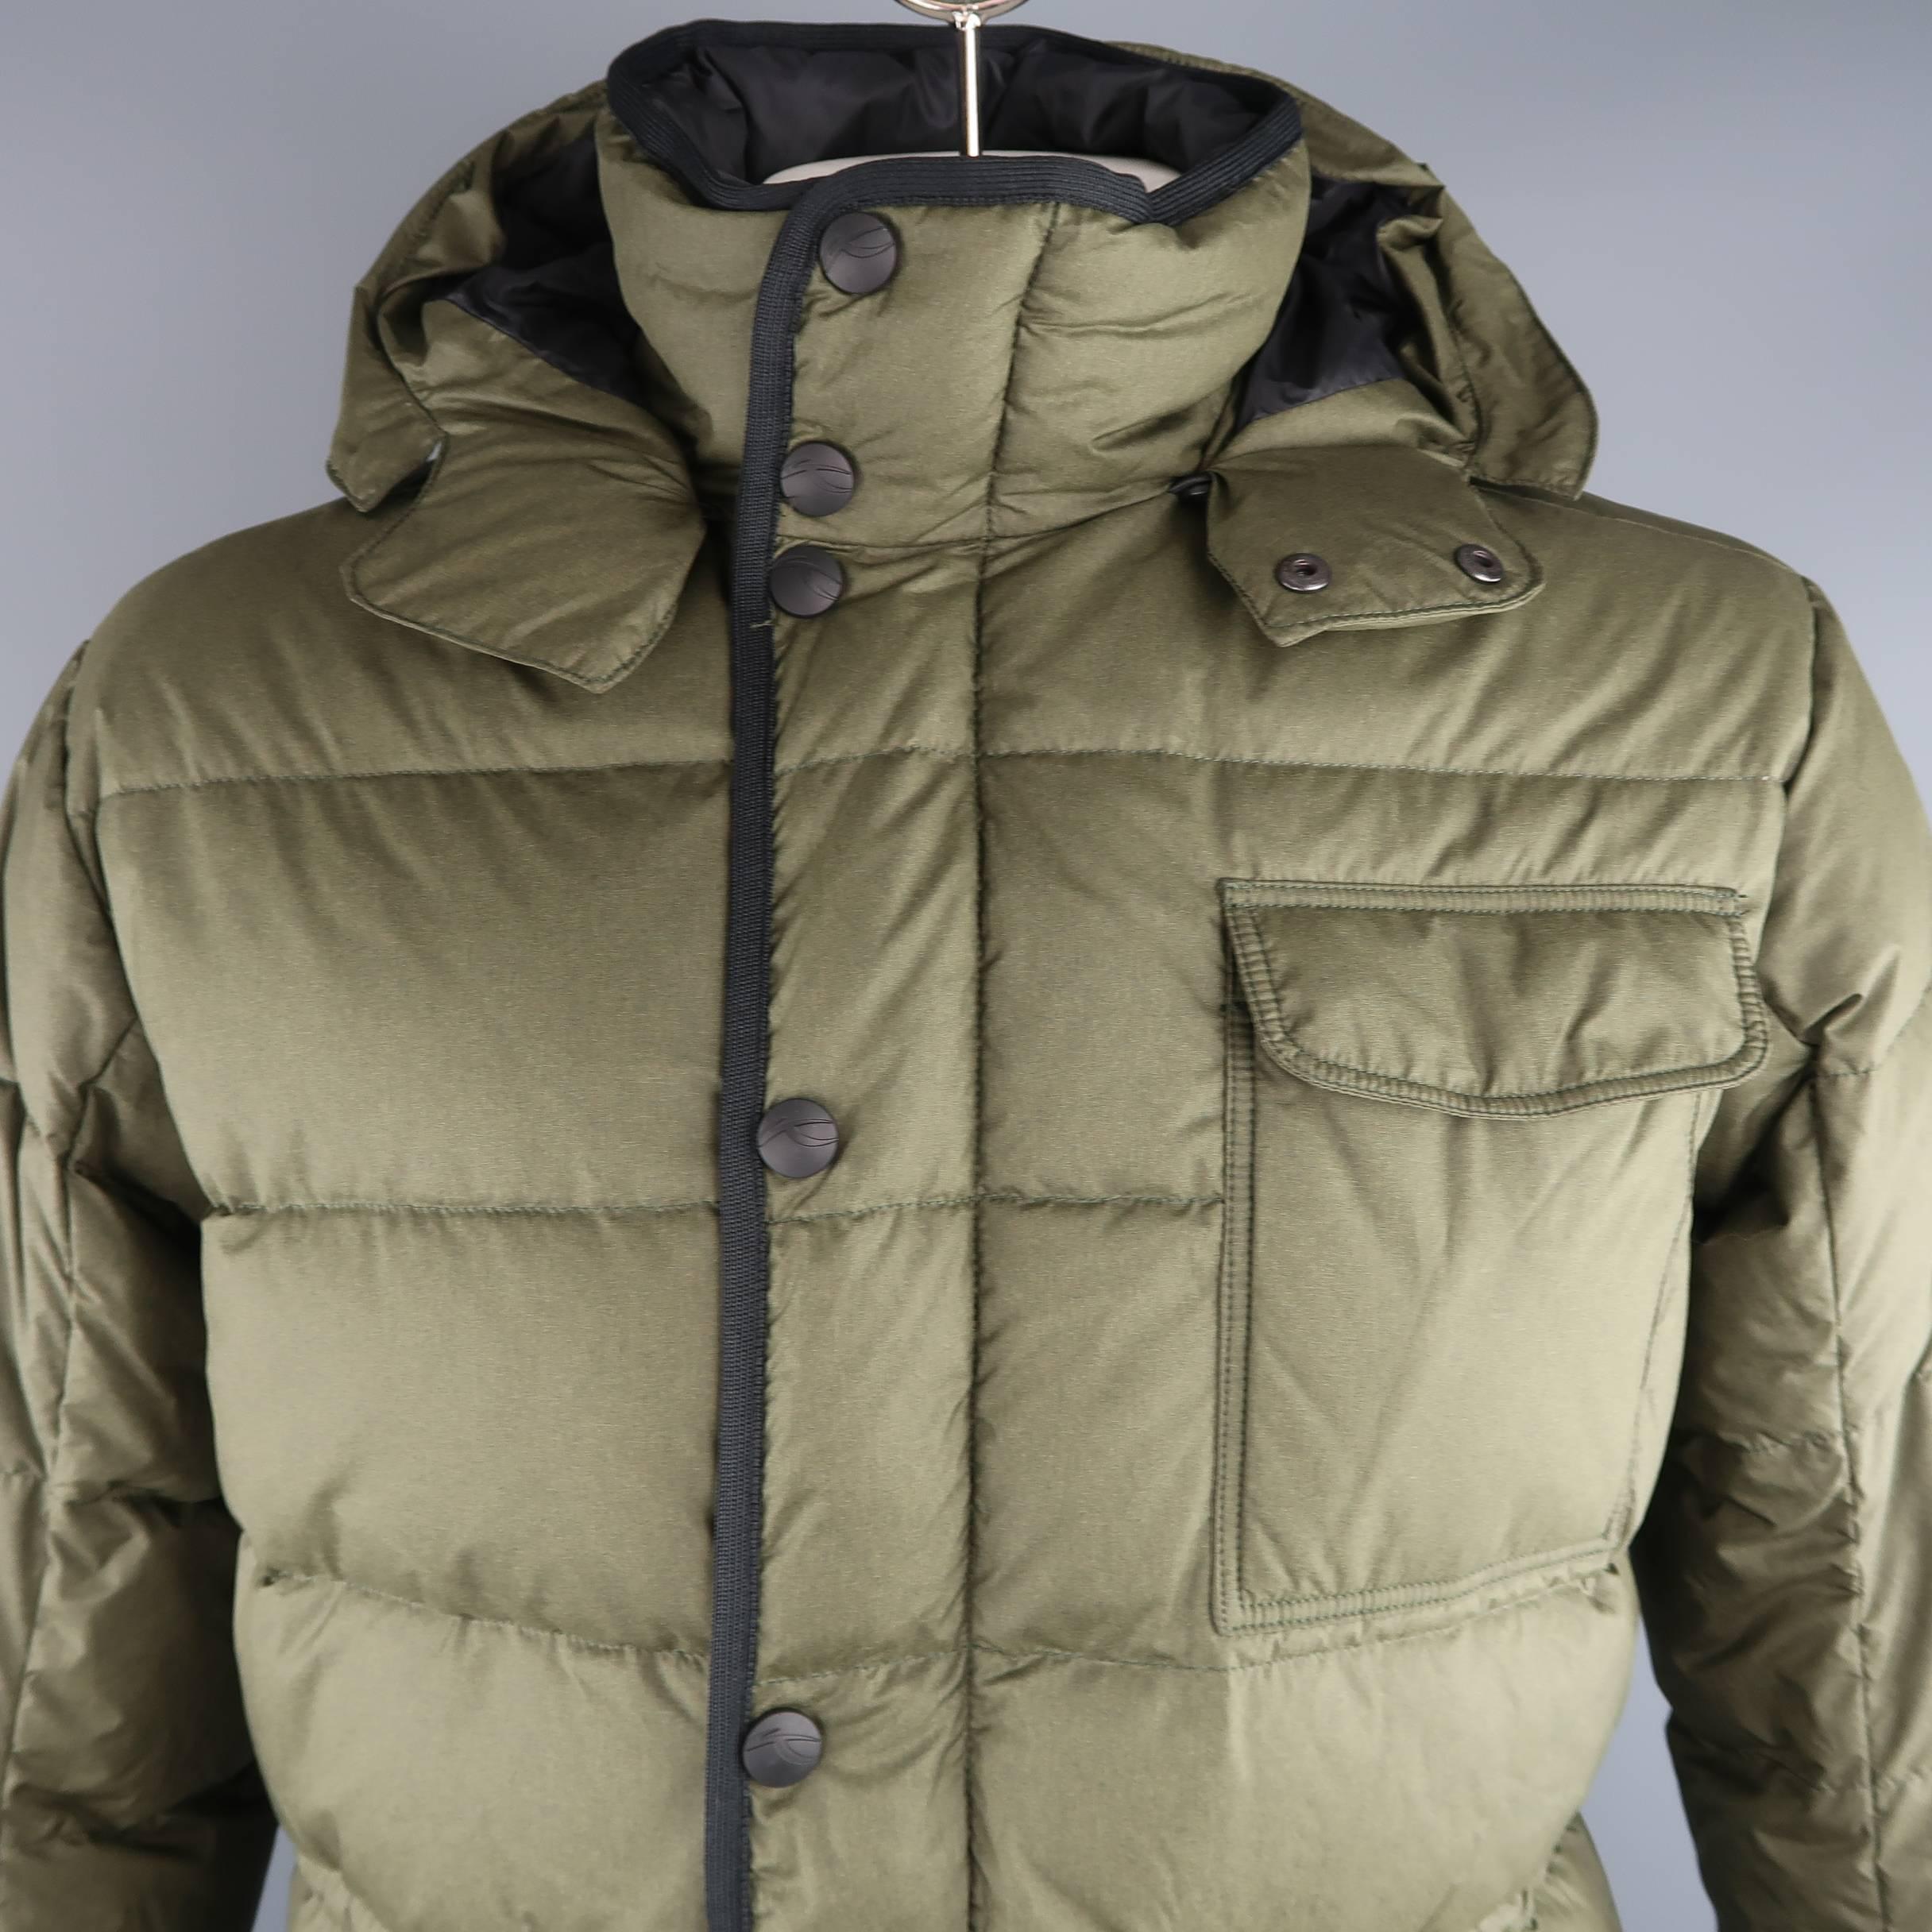 KHUS ski parka comes in quilted down feather olive polyester with a hight neck, snap placket zip closure, flap pockets, and detachable hoot. Made in Slovakia.
 
Excellent Pre-Owned Condition.
Marked: 52 L
 
Measurements:
 
Shoulder: 20 in.
Chest: 48